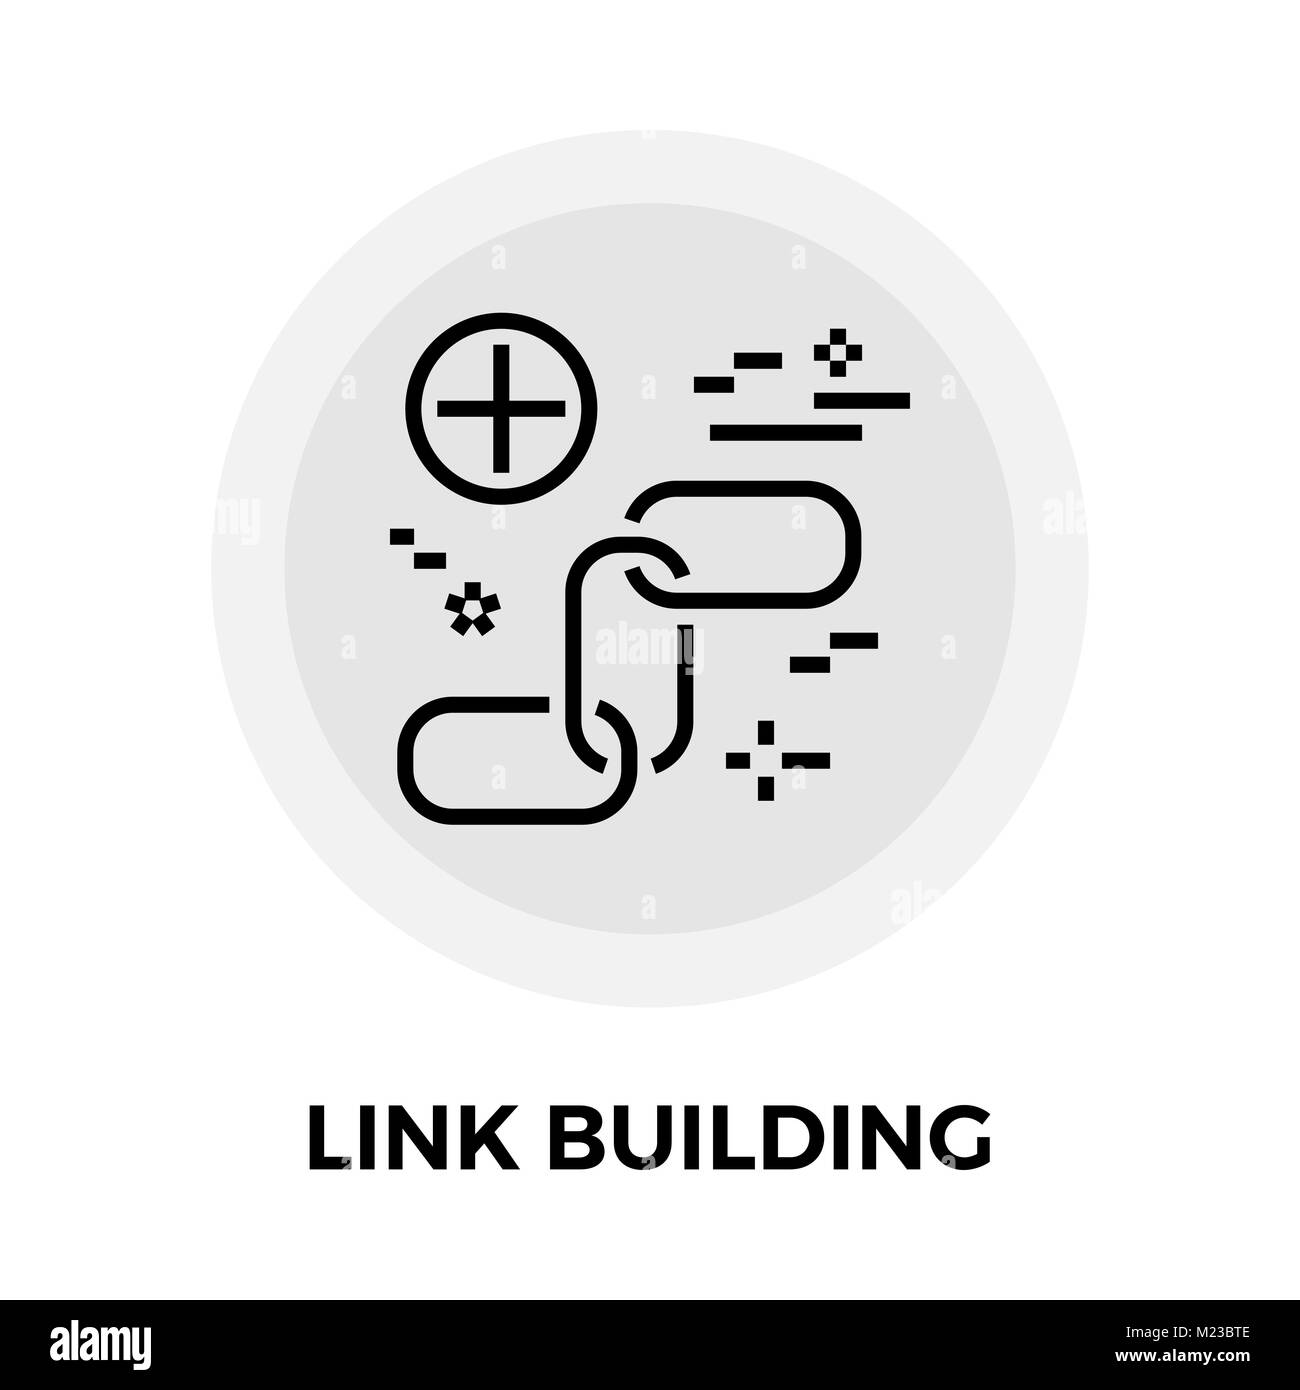 Link Building icon vector. Flat icon isolated on the white background. Editable EPS file. Vector illustration. Stock Vector